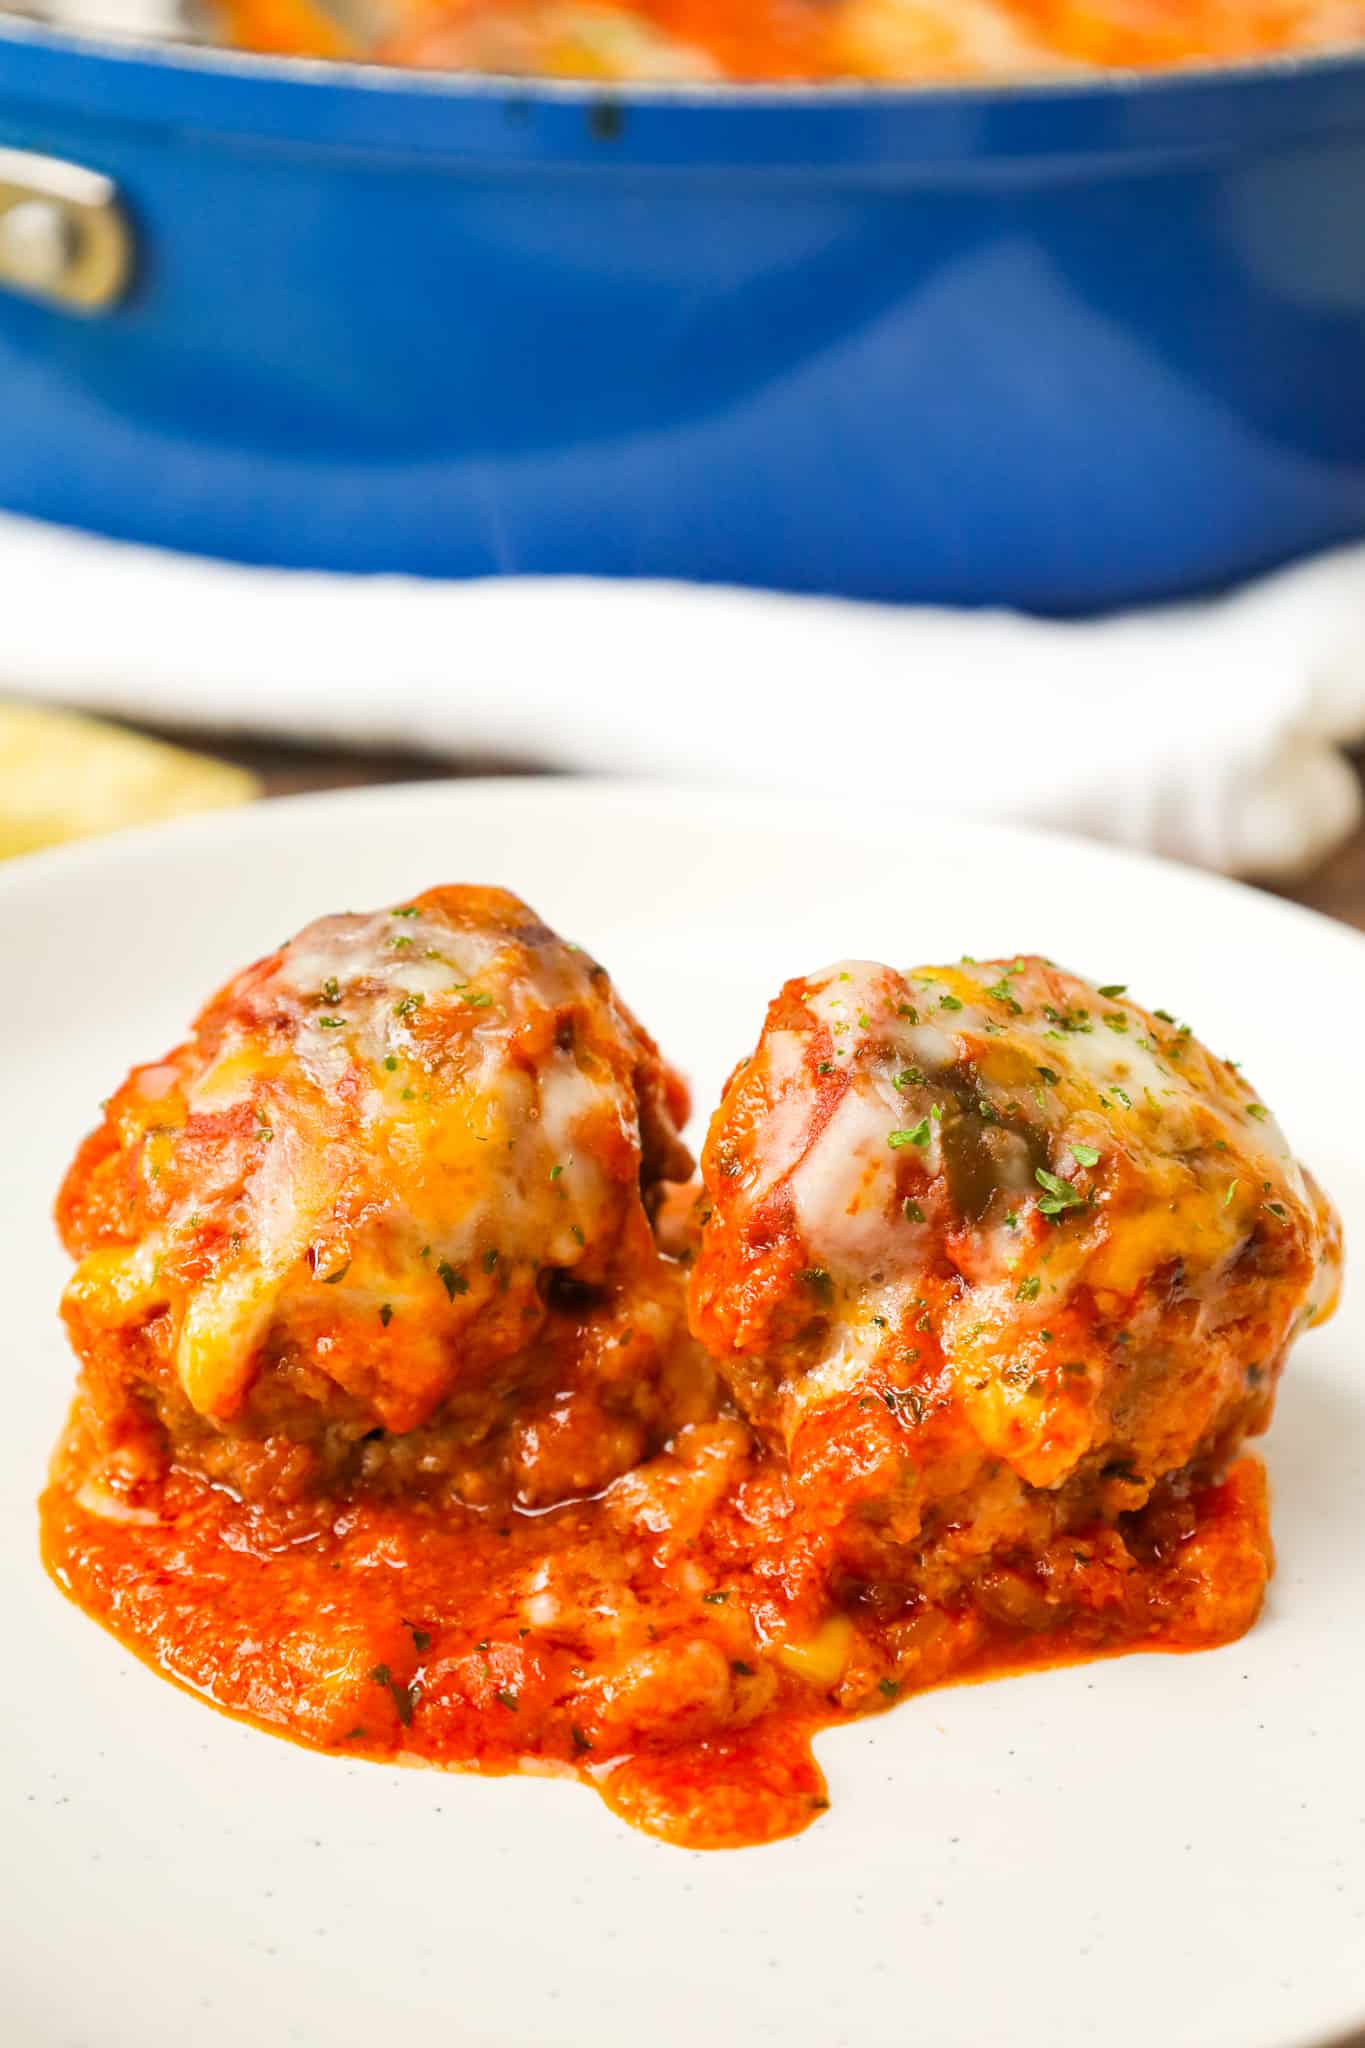 Tex Mex Meatballs are an easy dinner recipe made with ground beef, crushed corn chips, taco seasoning and cheese cooked in a sauce made with tomato sauce and salsa.